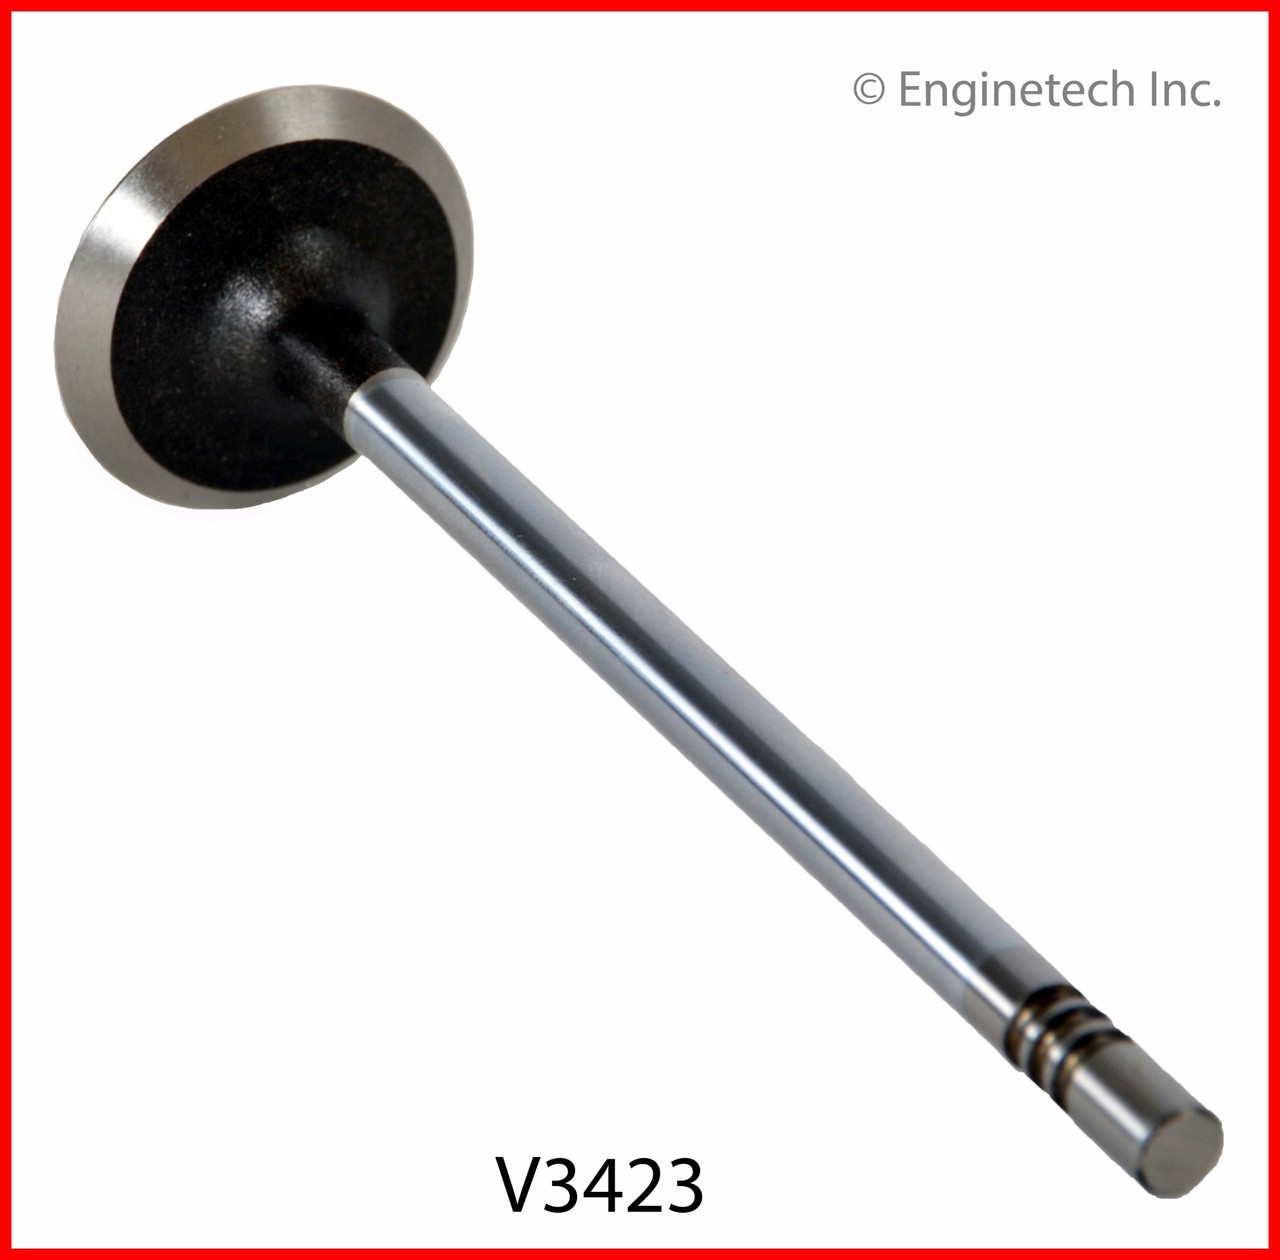 2007 Ford Fusion 3.0L Engine Exhaust Valve V3423 -57